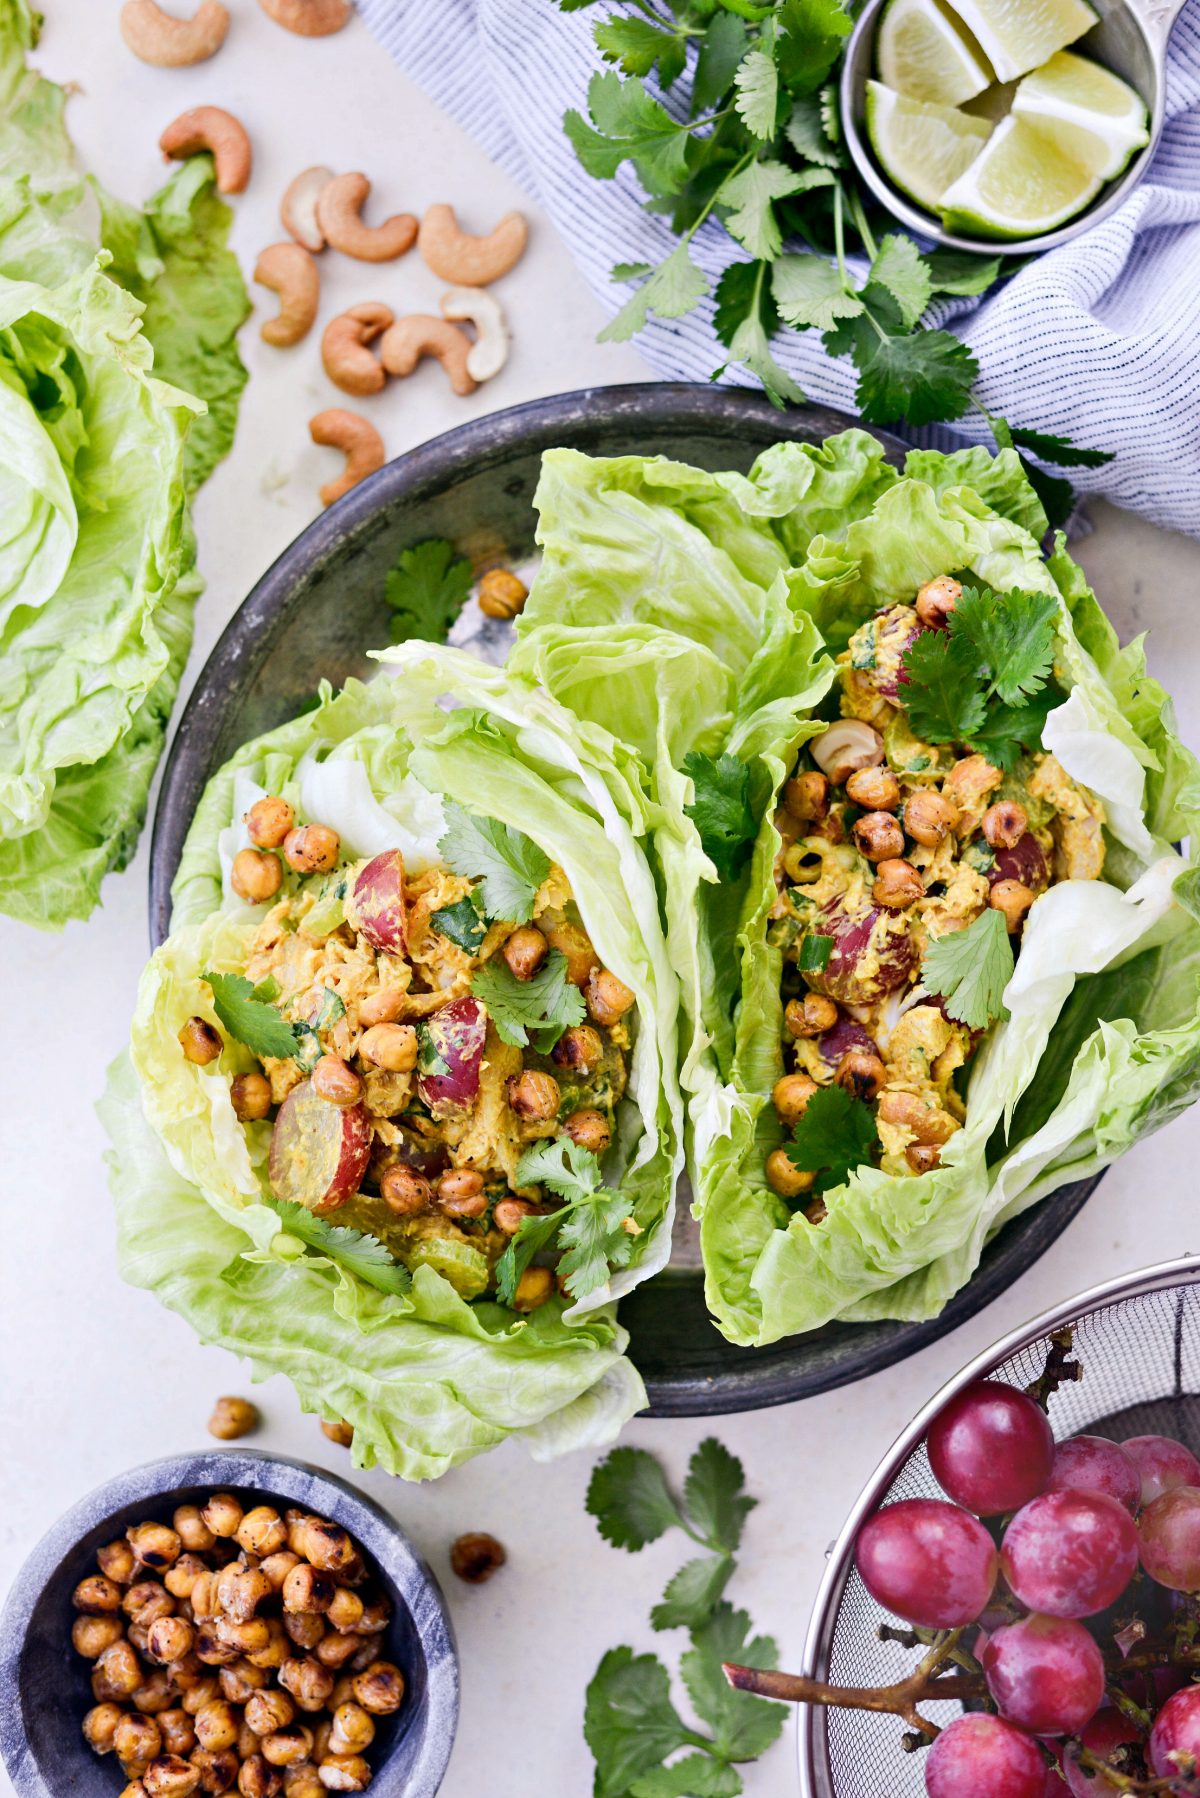 Curried Chicken Salad with Grapes and Cashews l SimplyScratch.com #curry #turmeric #chicken #salad #healthy #grapes #cashews #lunch #easy #recipe